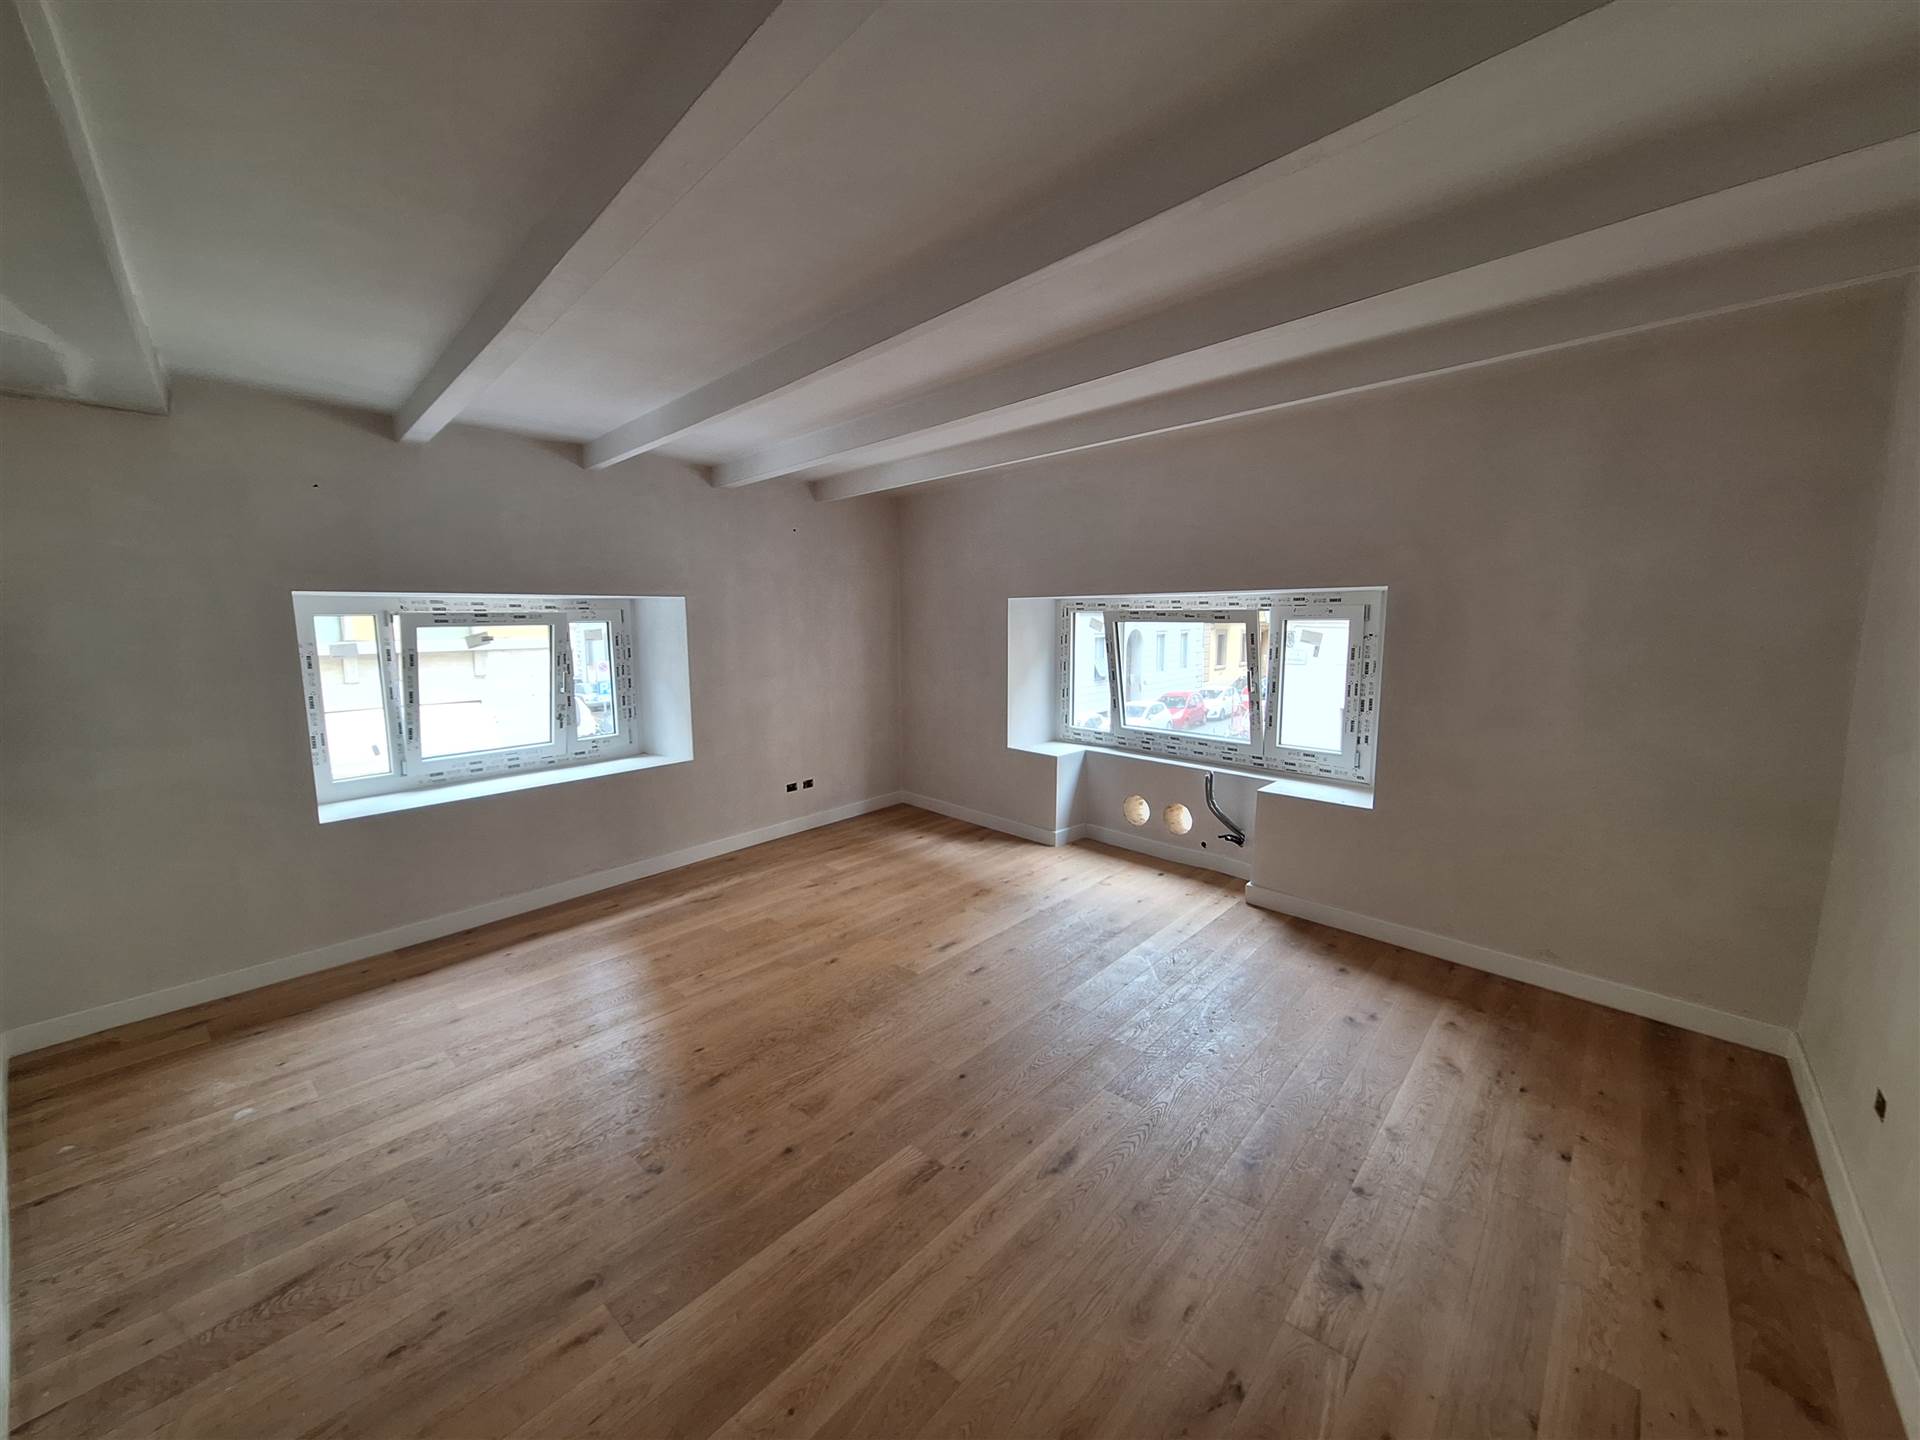 COMUNALE, FIRENZE, Apartment for sale of 54 Sq. mt., Restored, Heating Individual heating system, Energetic class: G, Epi: 276 kwh/m2 year, placed at 